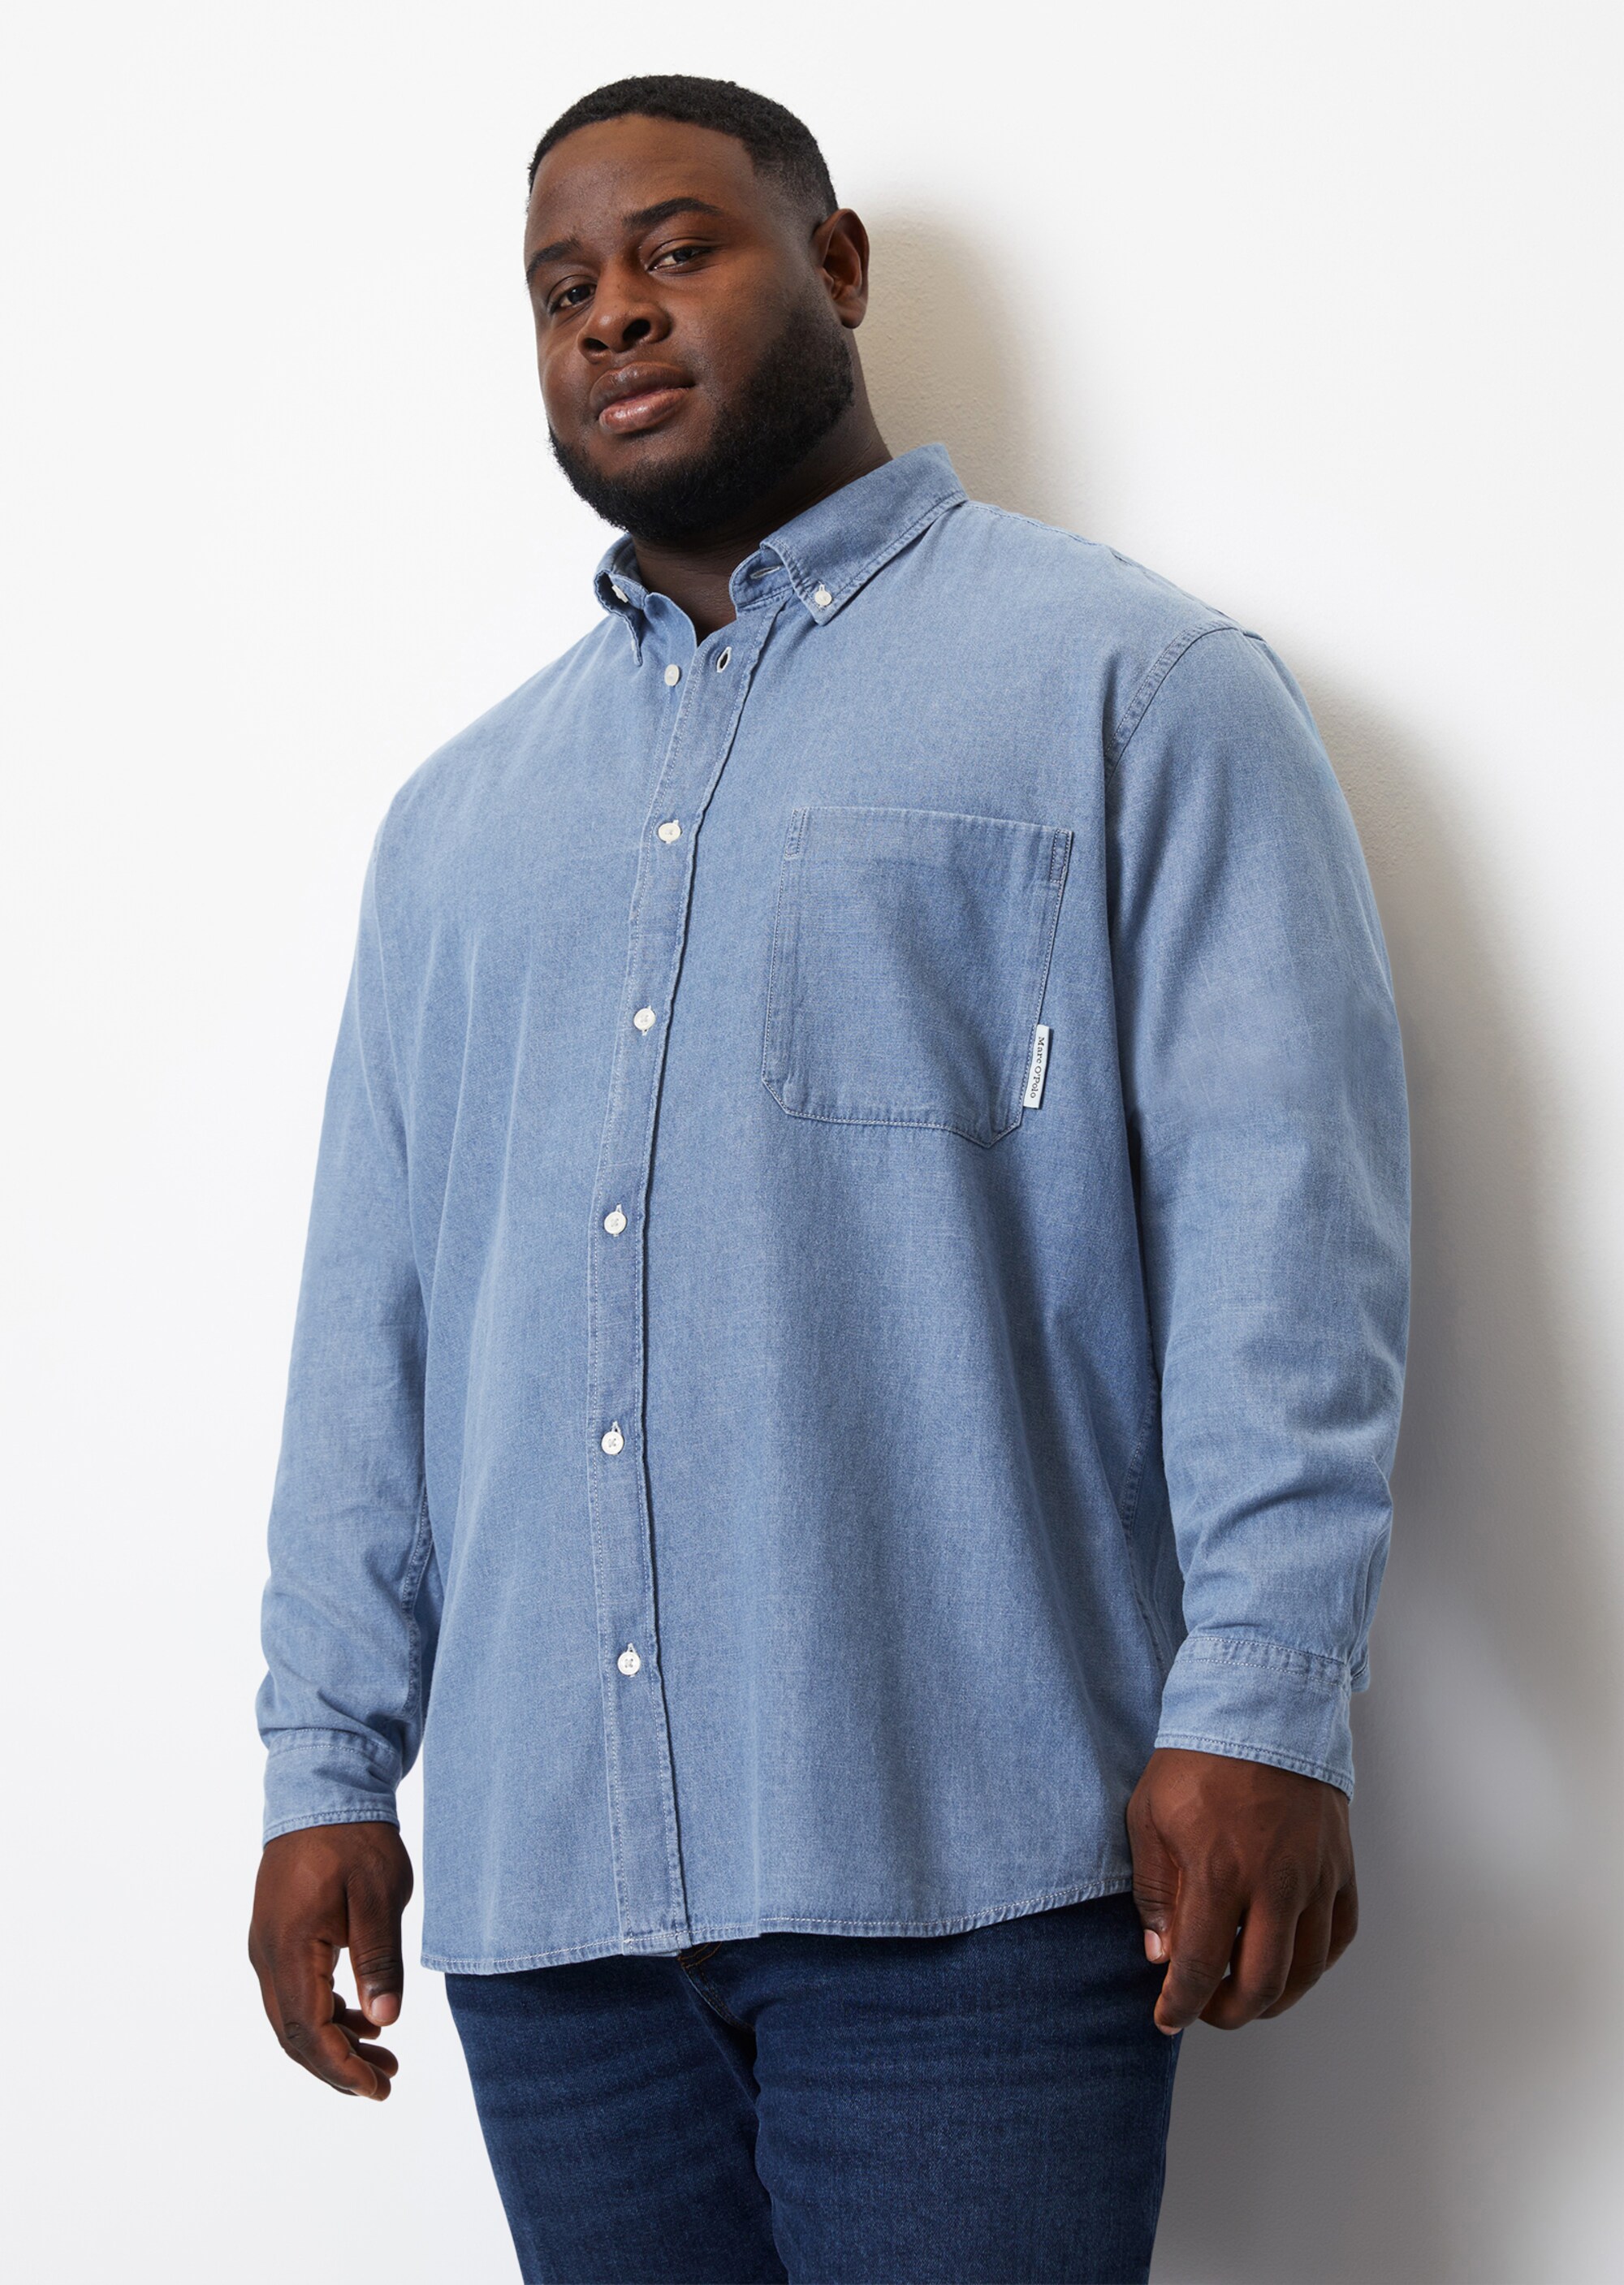 Mocotono Men's Long Sleeve Thick Denim Shirt Light Blue (Thick) X-Large :  Amazon.in: Clothing & Accessories